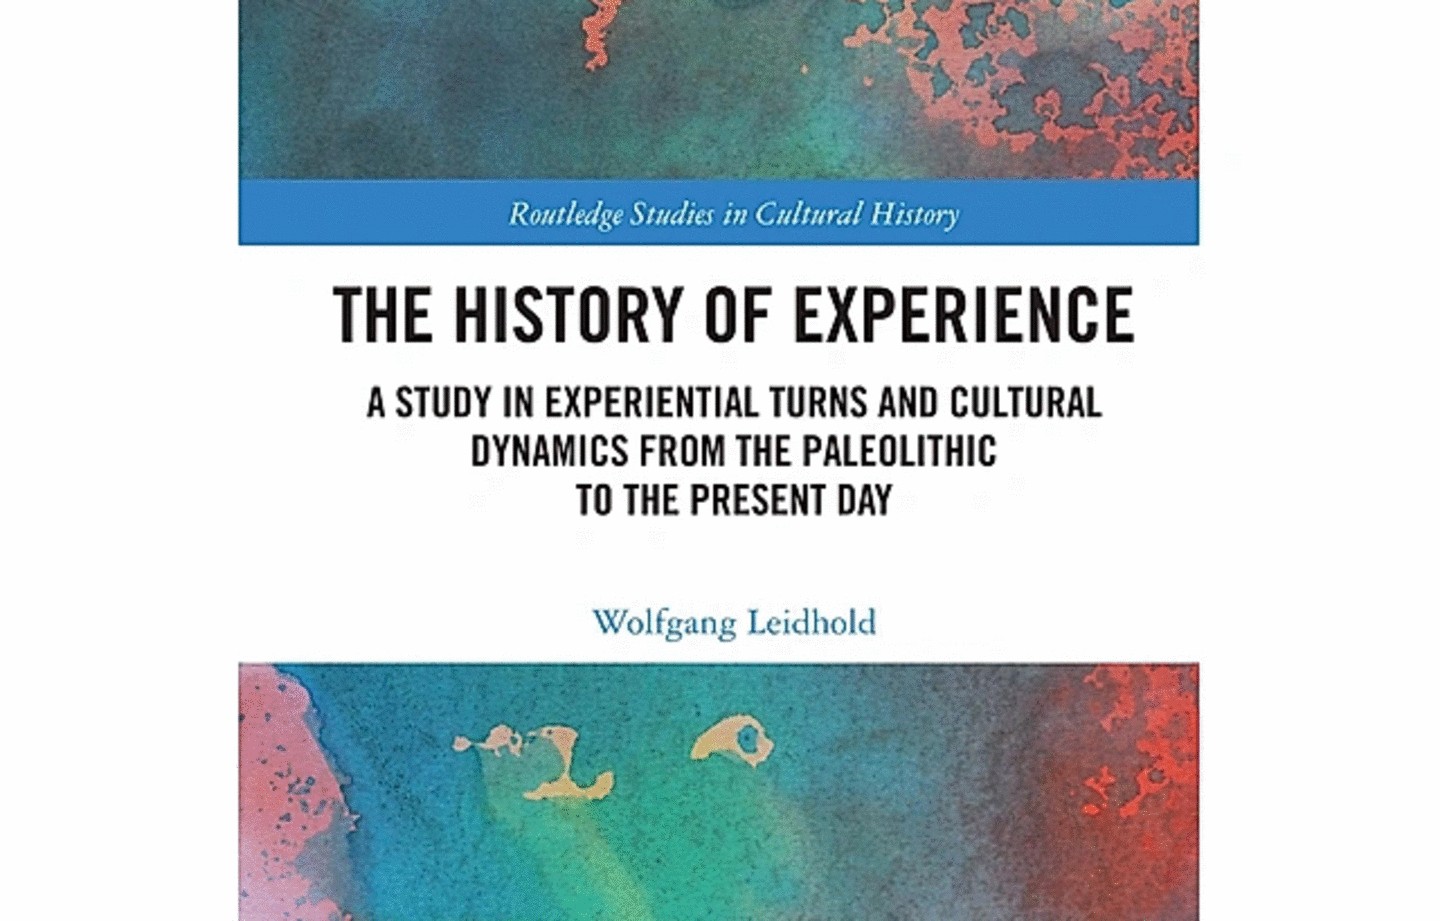 Just published: The History of Experience